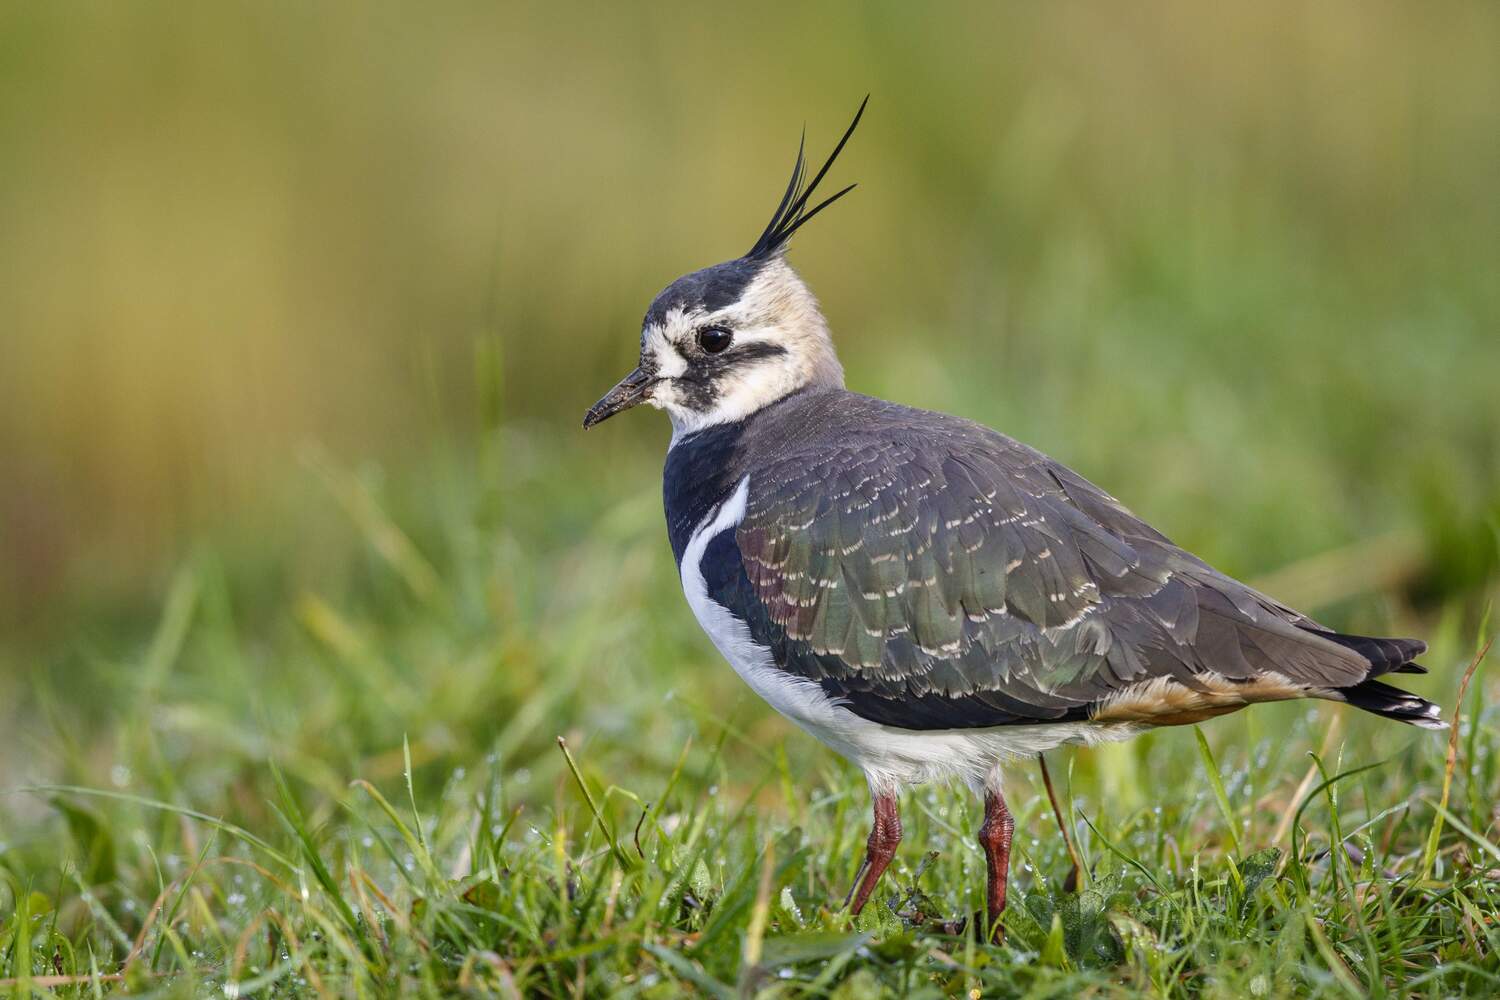 Farmland birds declined strongly across Europe. Without the unique sound of birds like this displaying Lapwings, agricultural fields are much more silent in spring